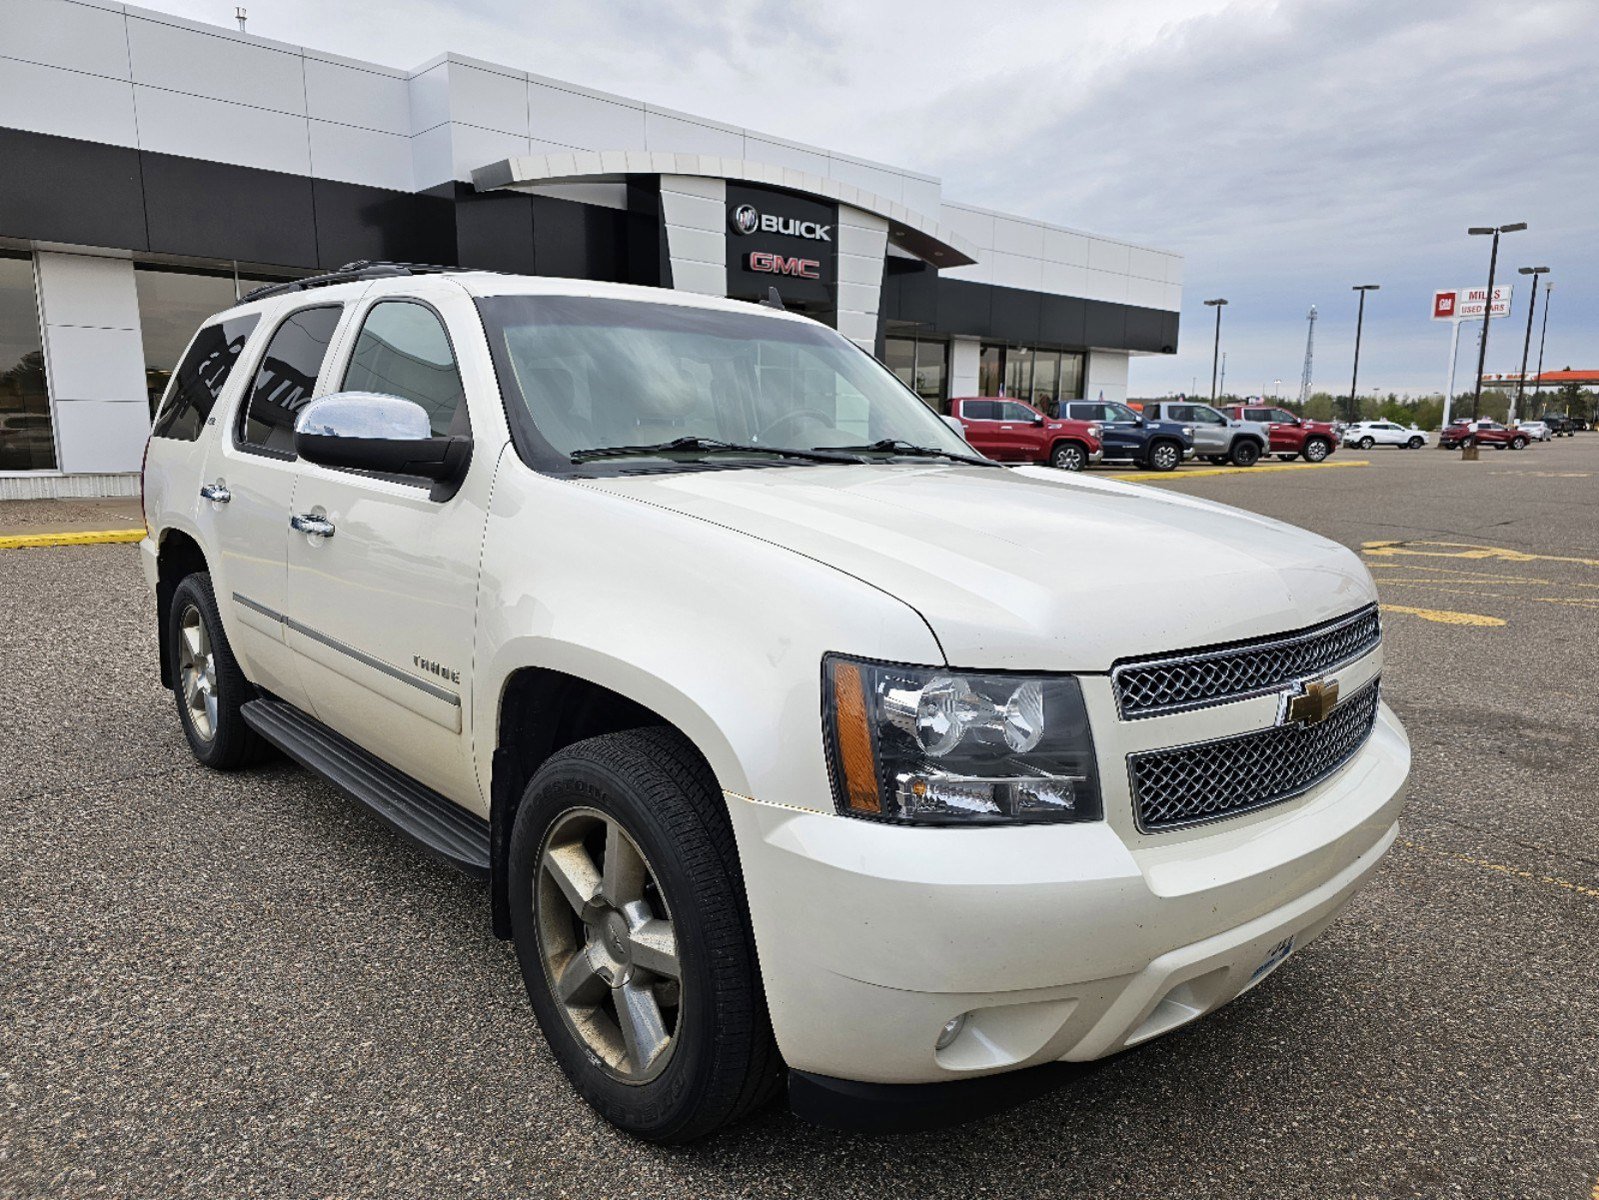 Used 2011 Chevrolet Tahoe LTZ with VIN 1GNSKCE07BR249964 for sale in Baxter, Minnesota